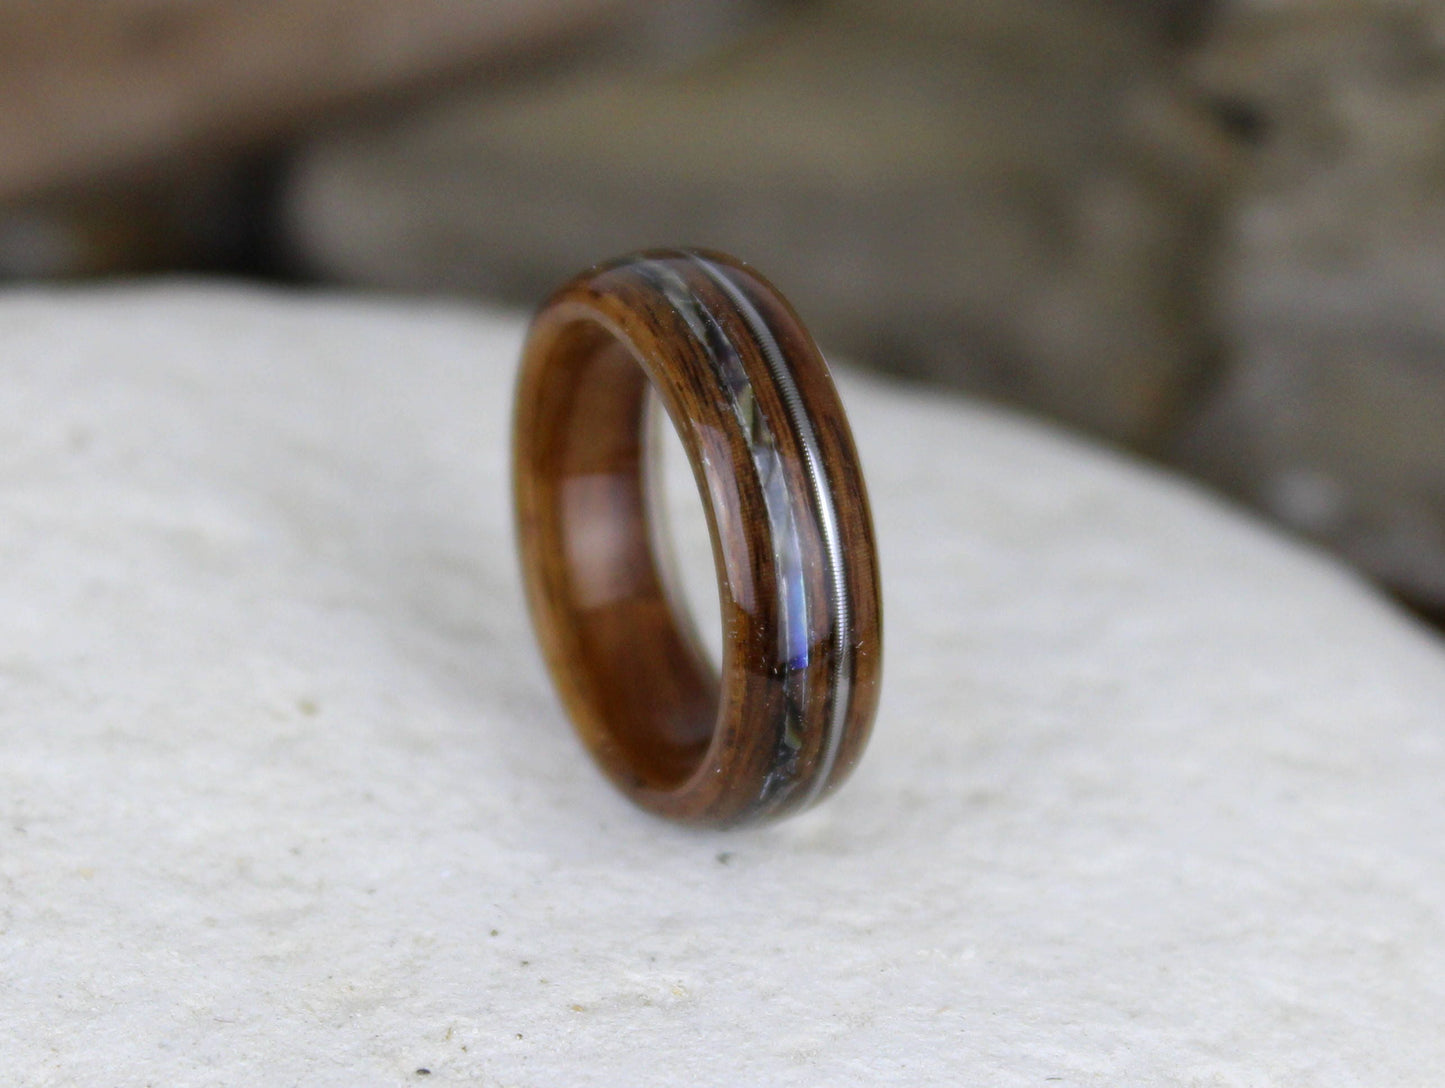 Rosewood with Guitar String & Abalone Bent Wood Ring